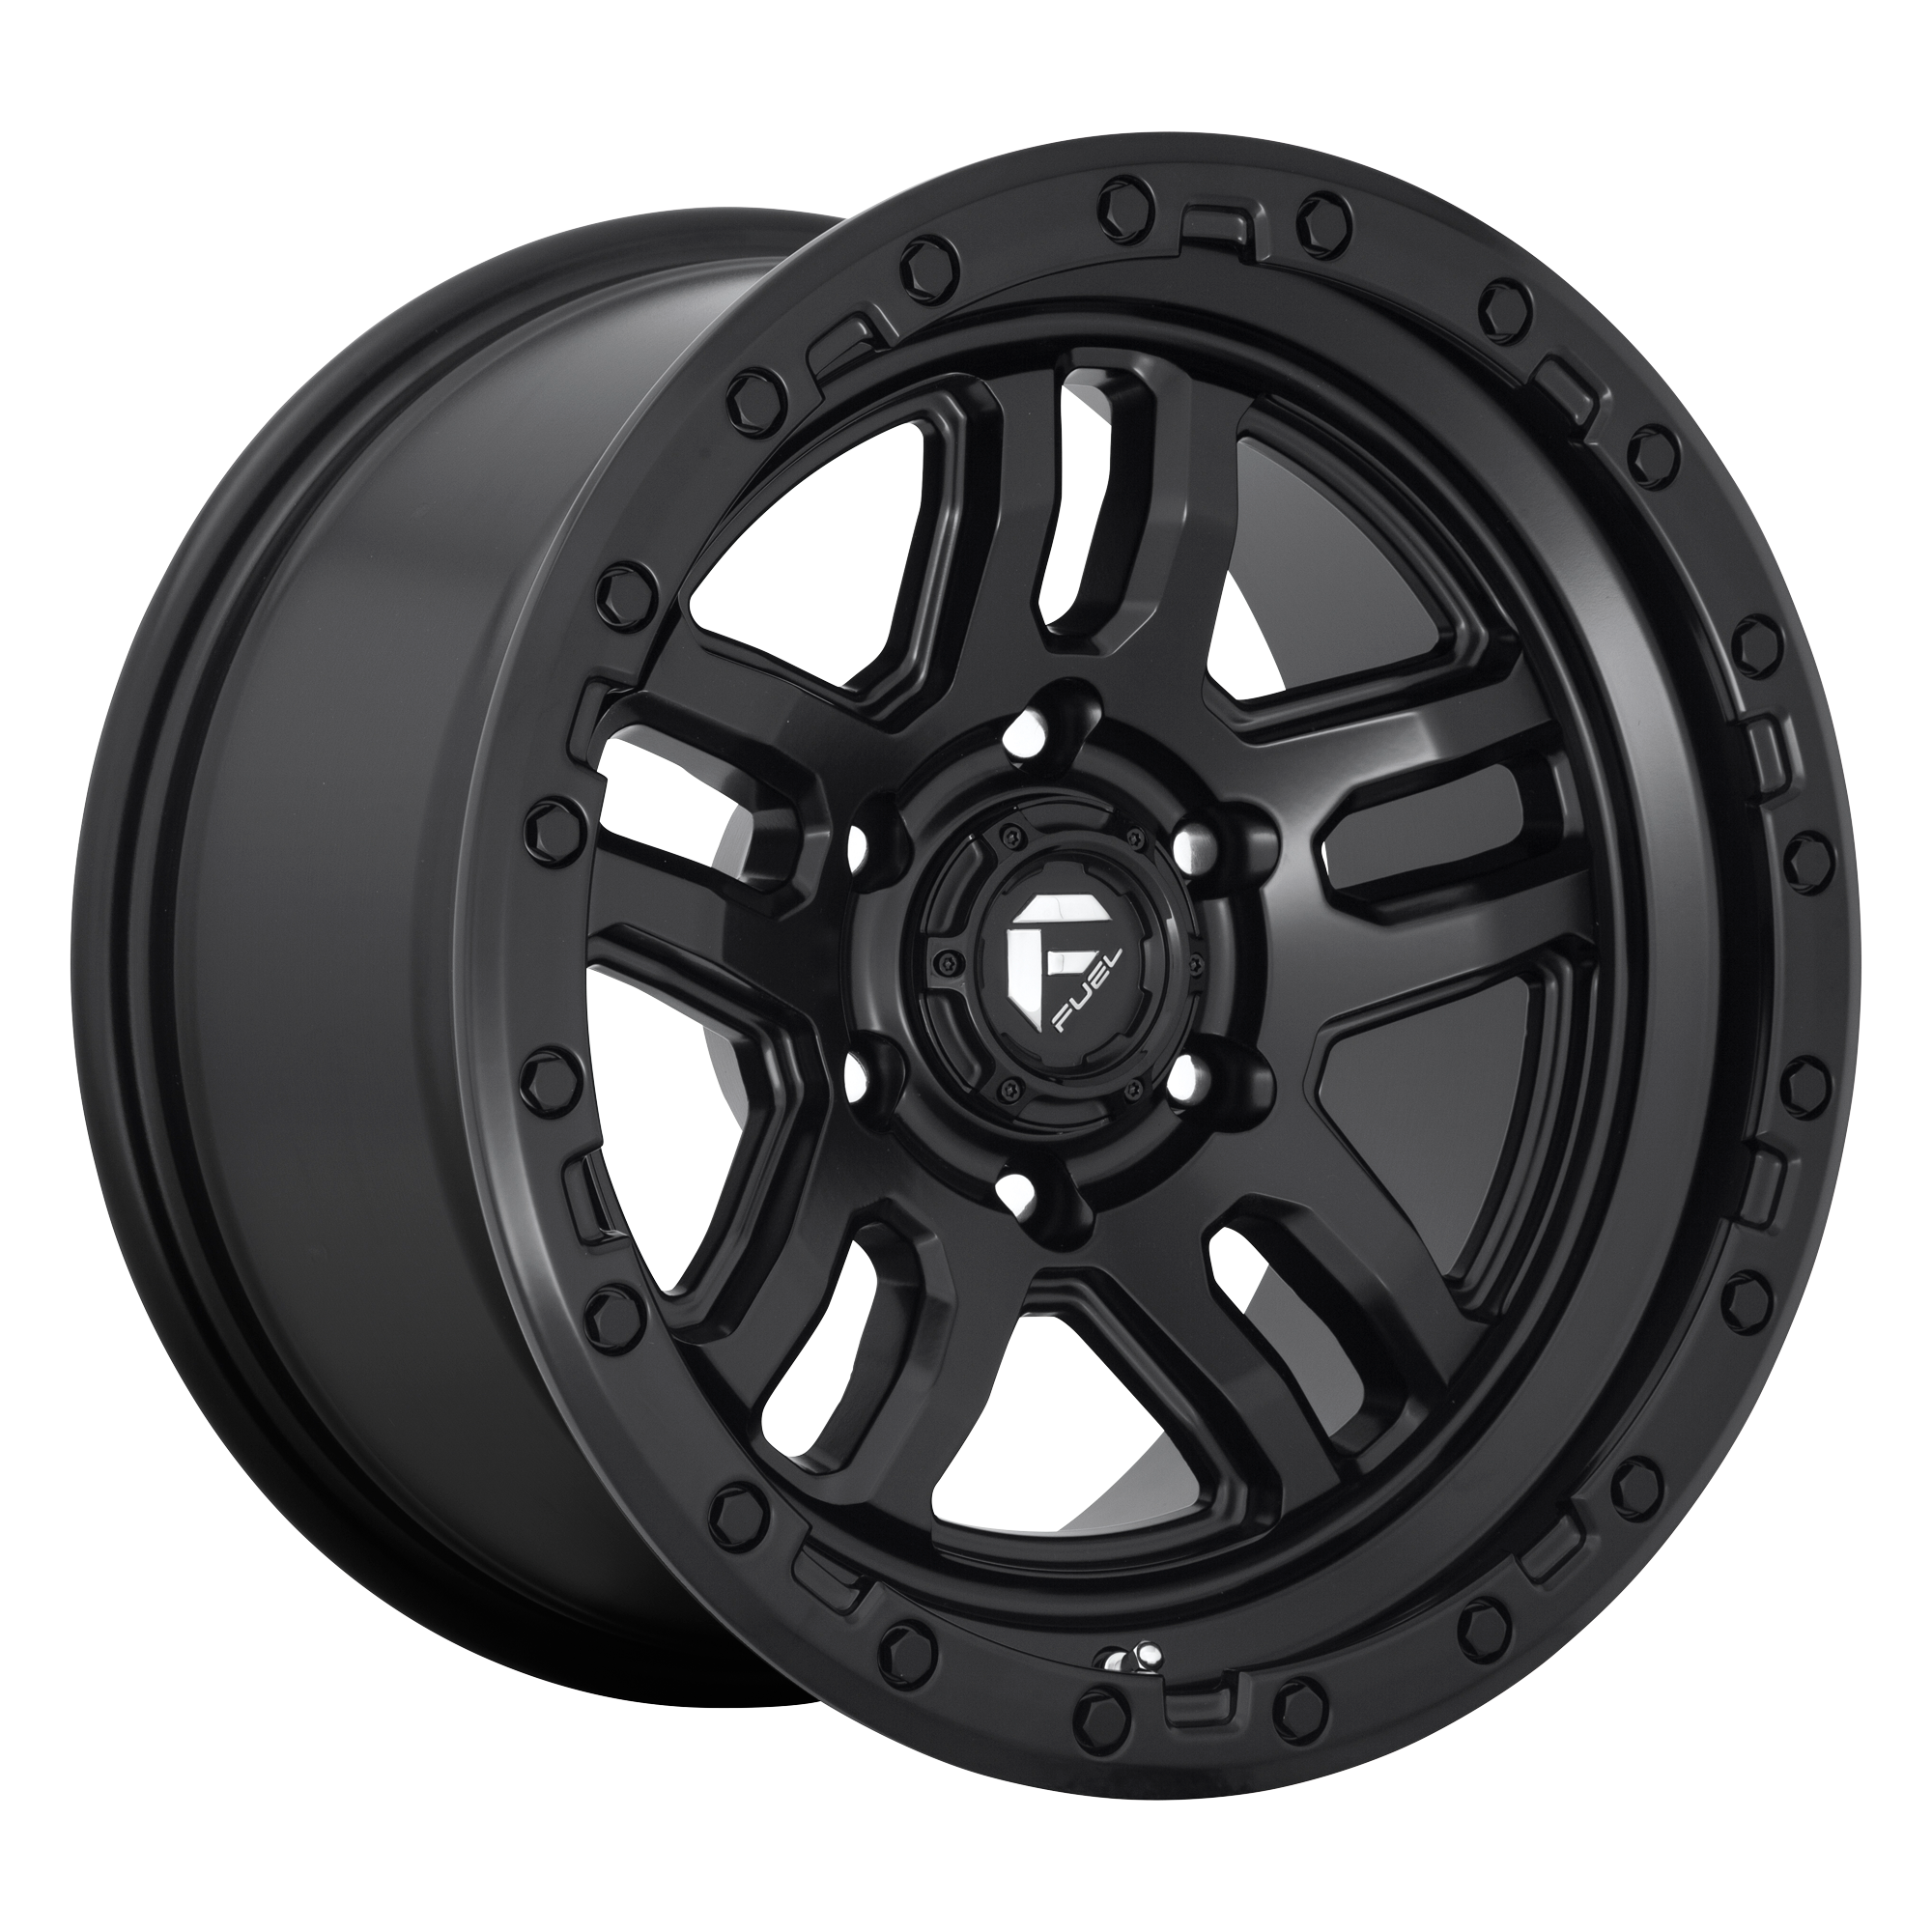 AMMO 17x9 6x135.00 MATTE BLACK (1 mm) - Tires and Engine Performance